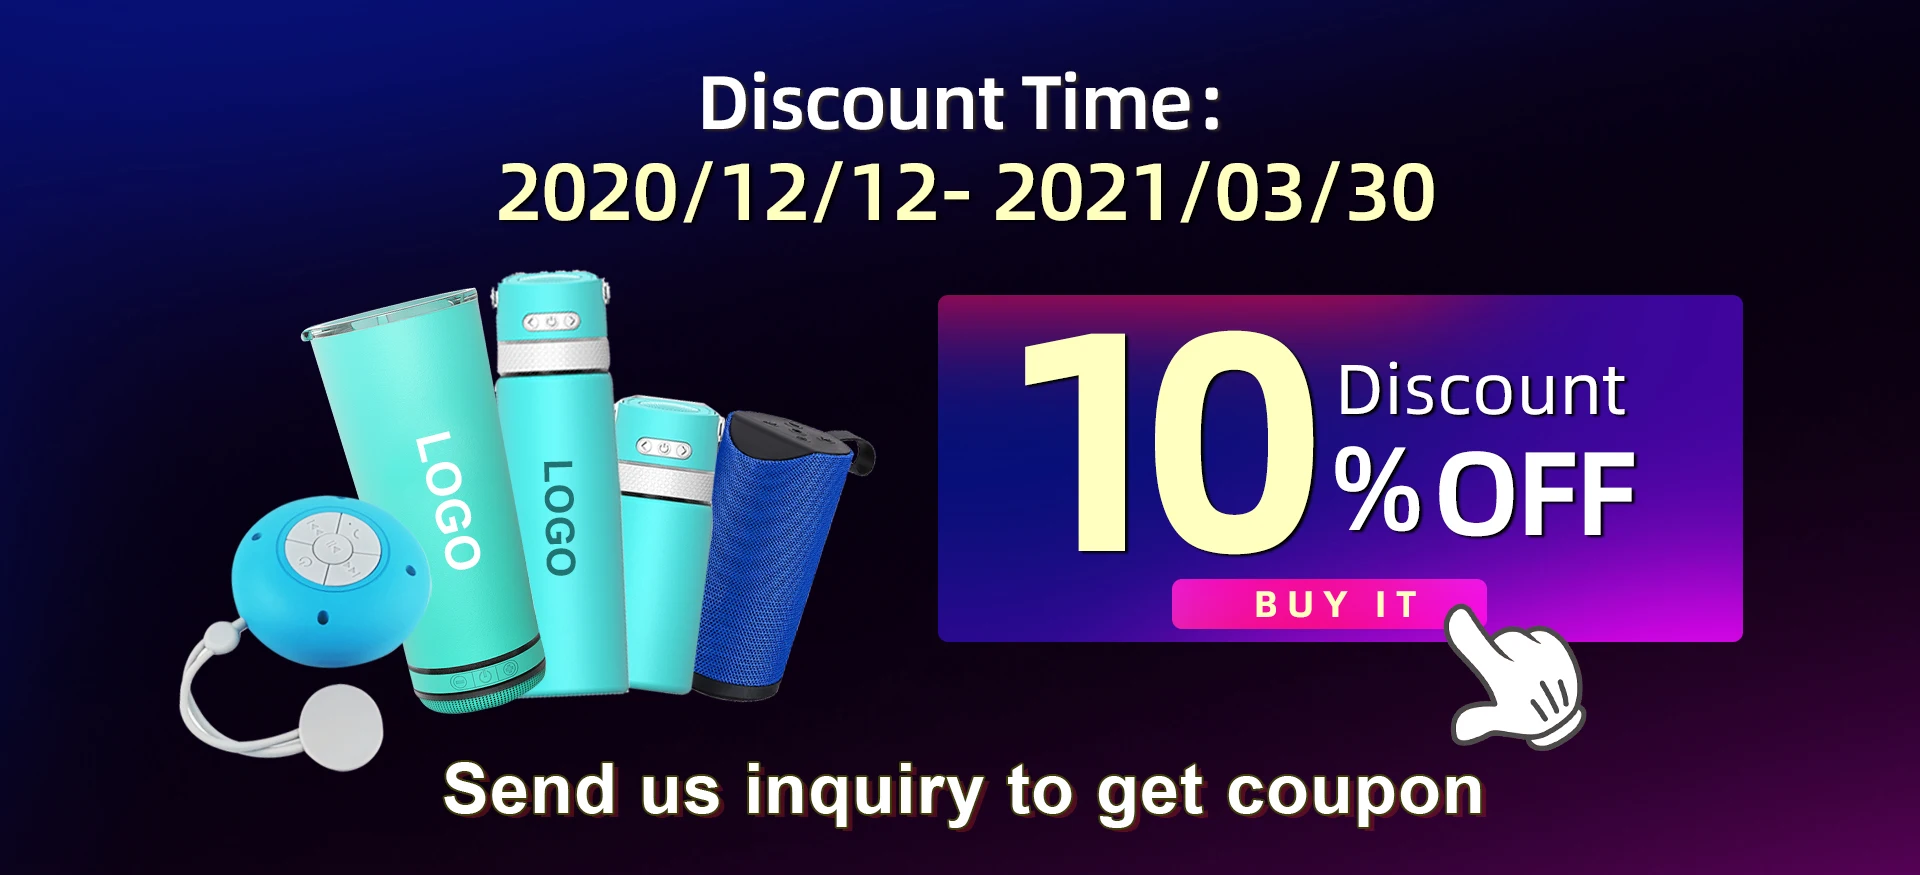 New Lifestyle Smart Cup Sport Portable bluetooth Tumbler Vaccum Flask Water Drink Small Music Bluetooth Speaker Bottle